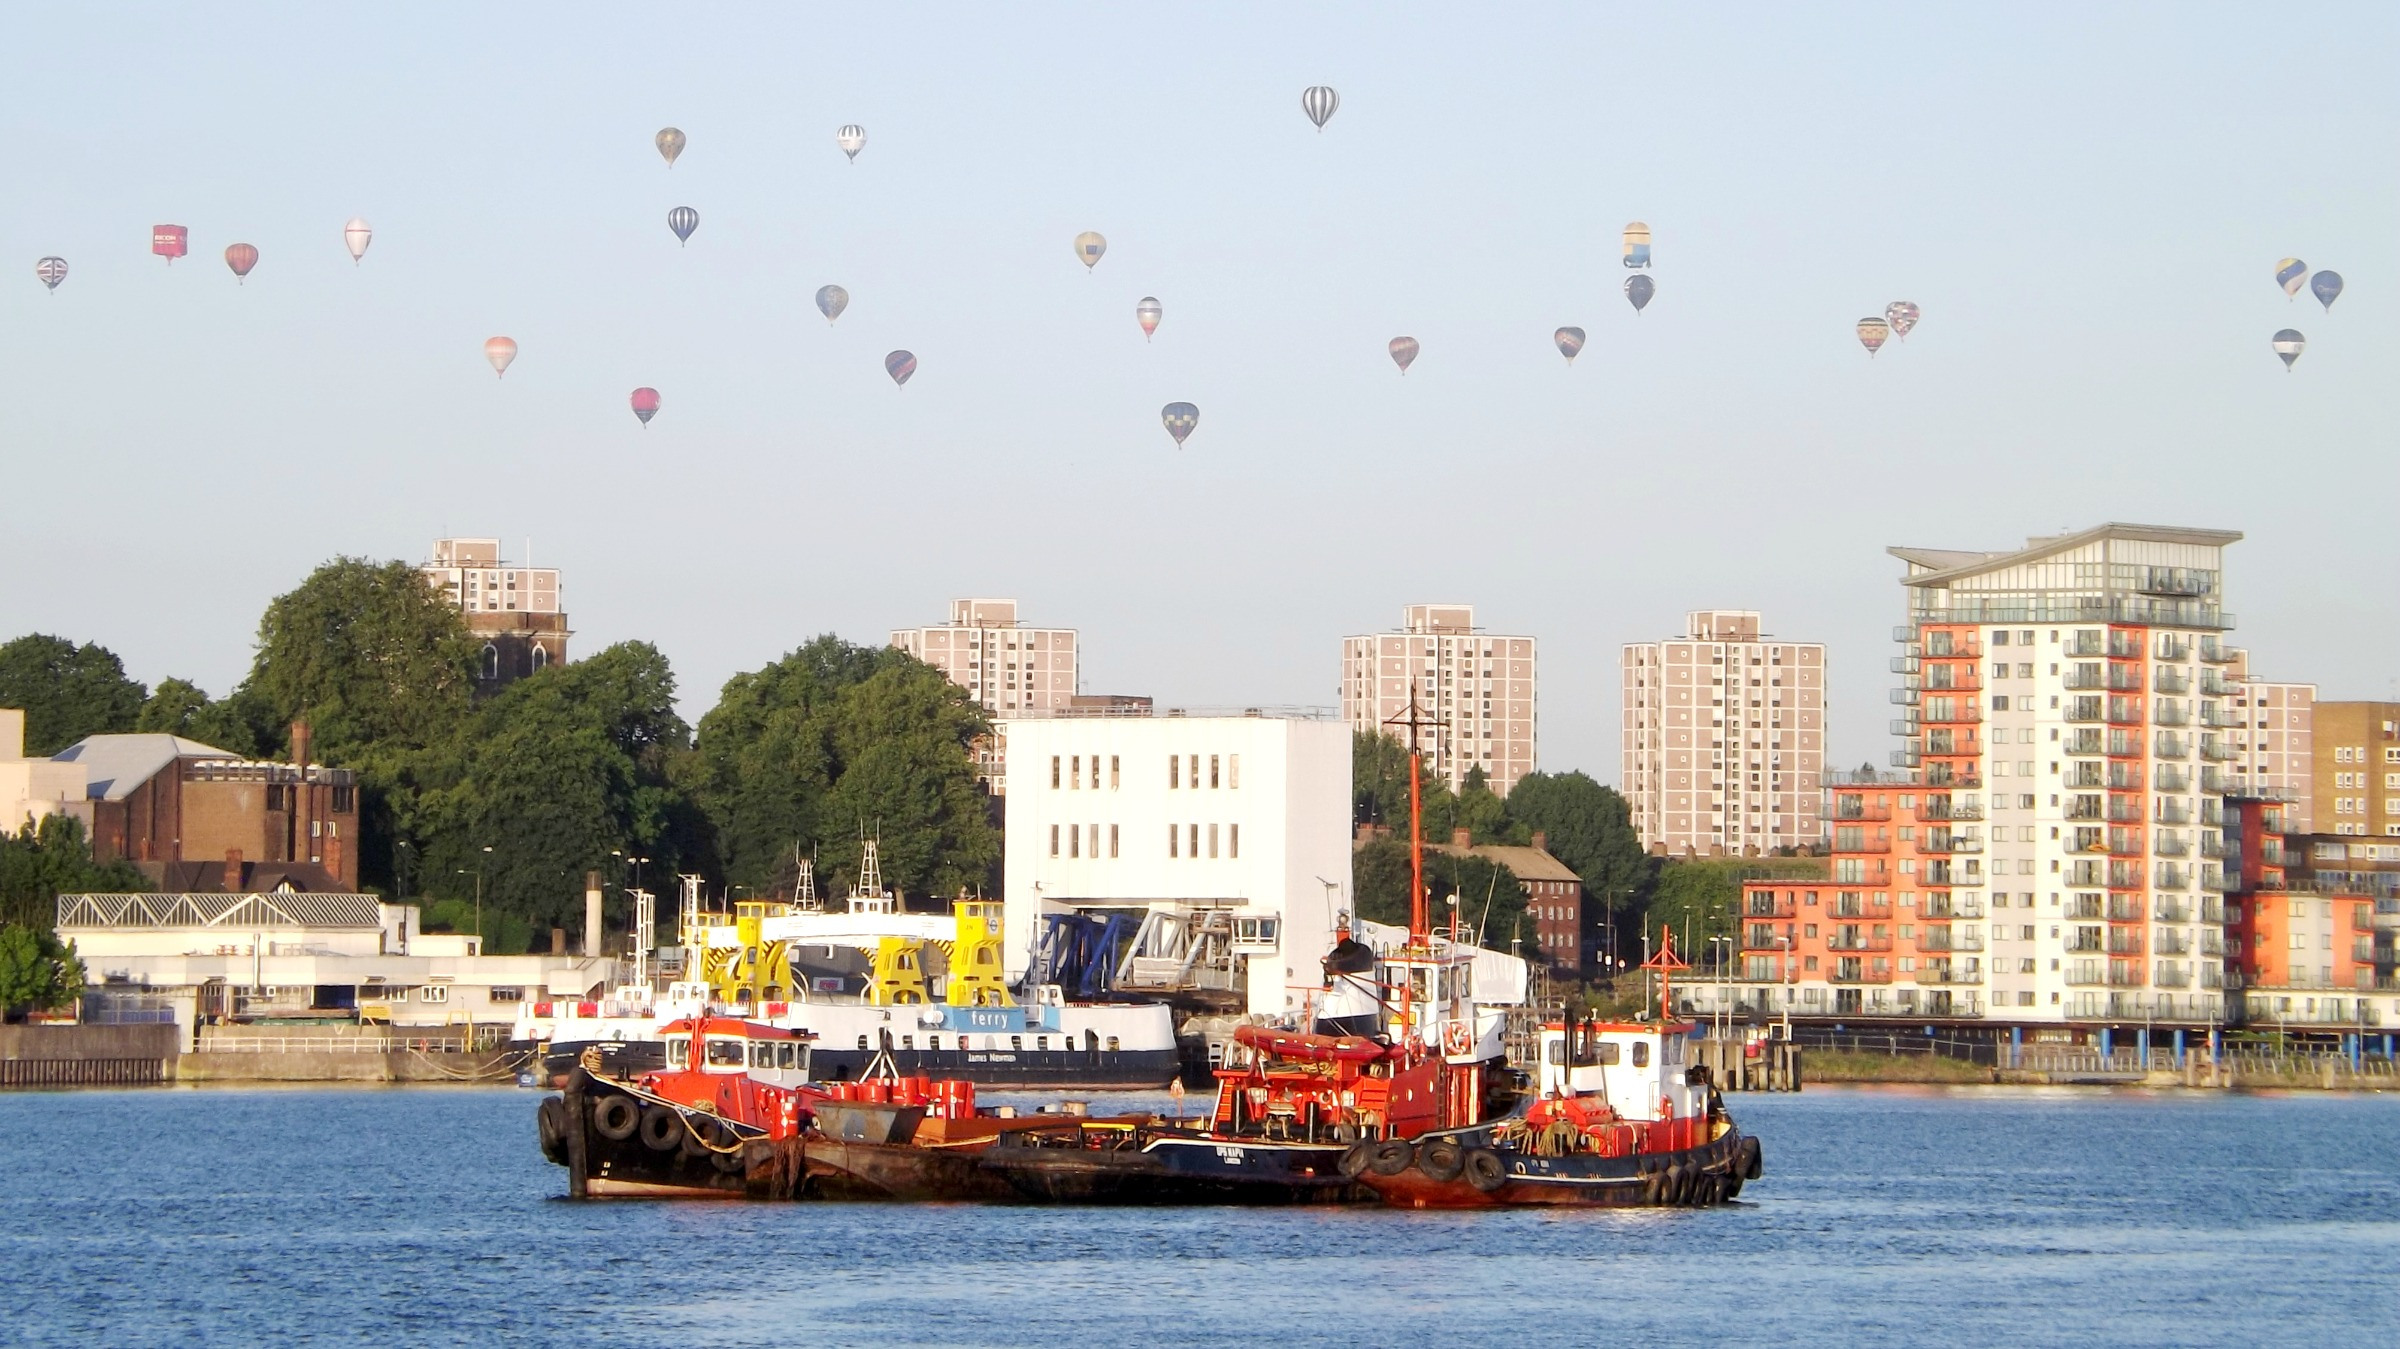 A large group of hot air balloons flying over the Royal Docks